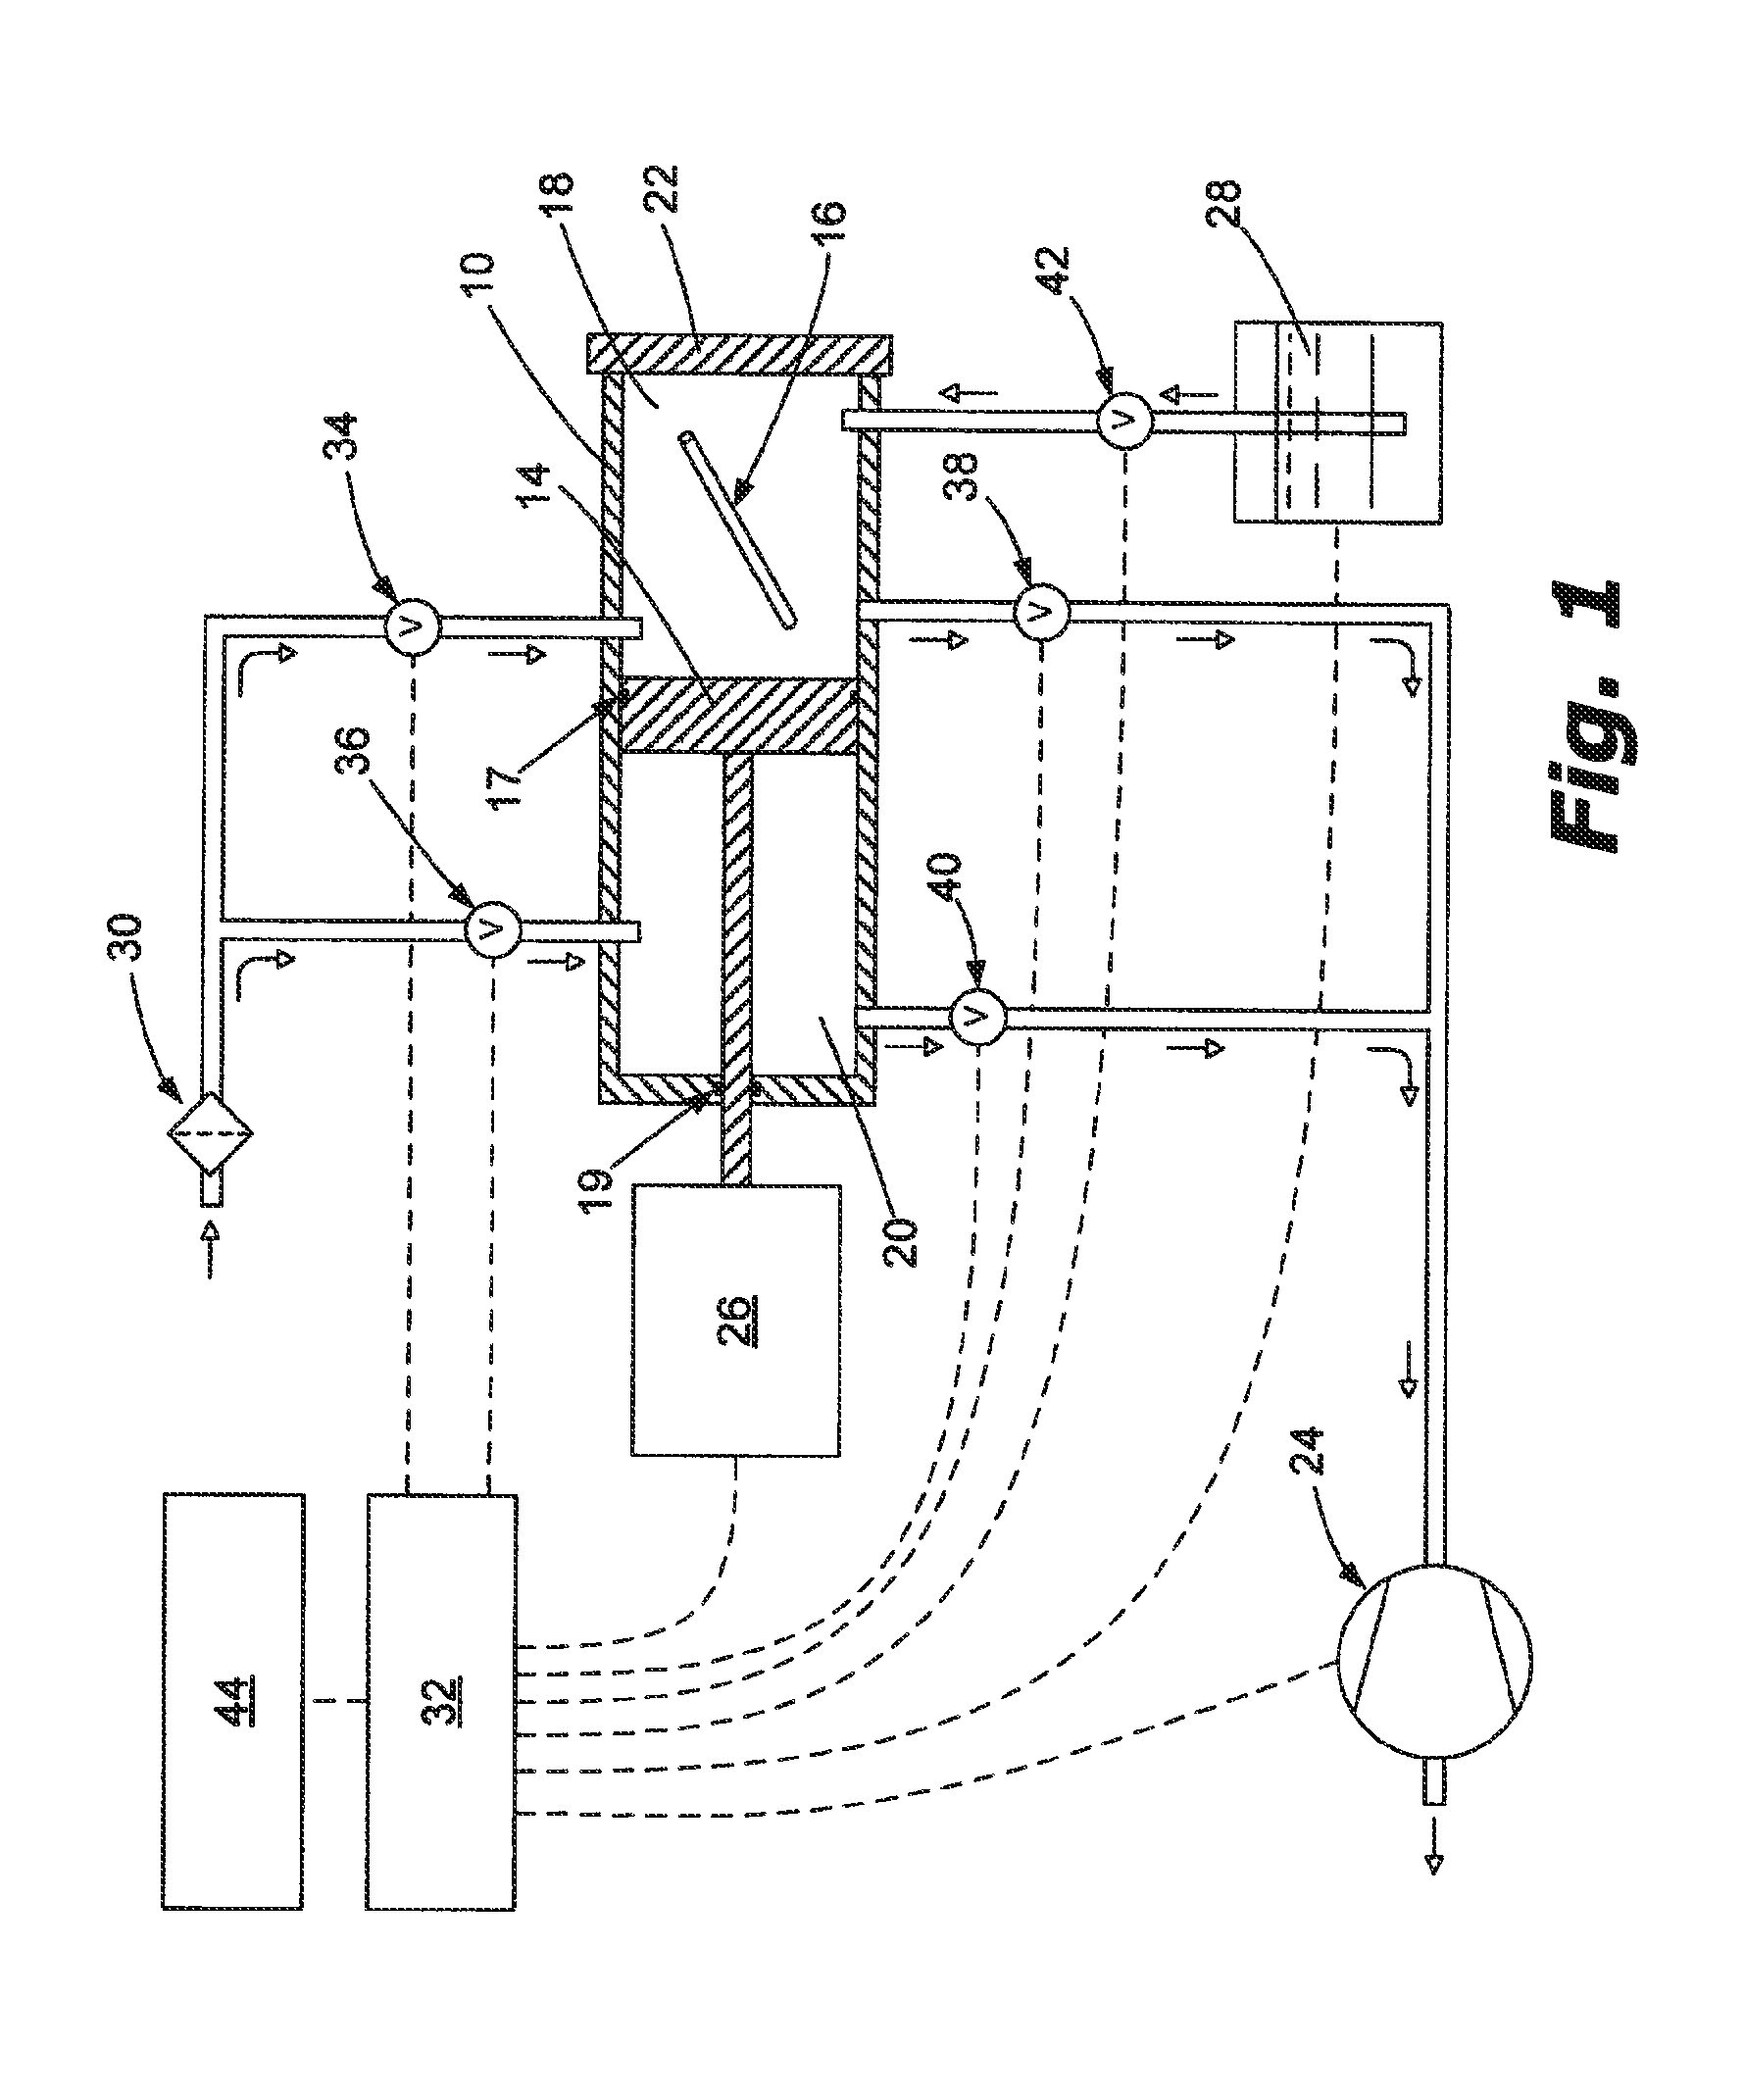 Sterilization method with compression and expansion